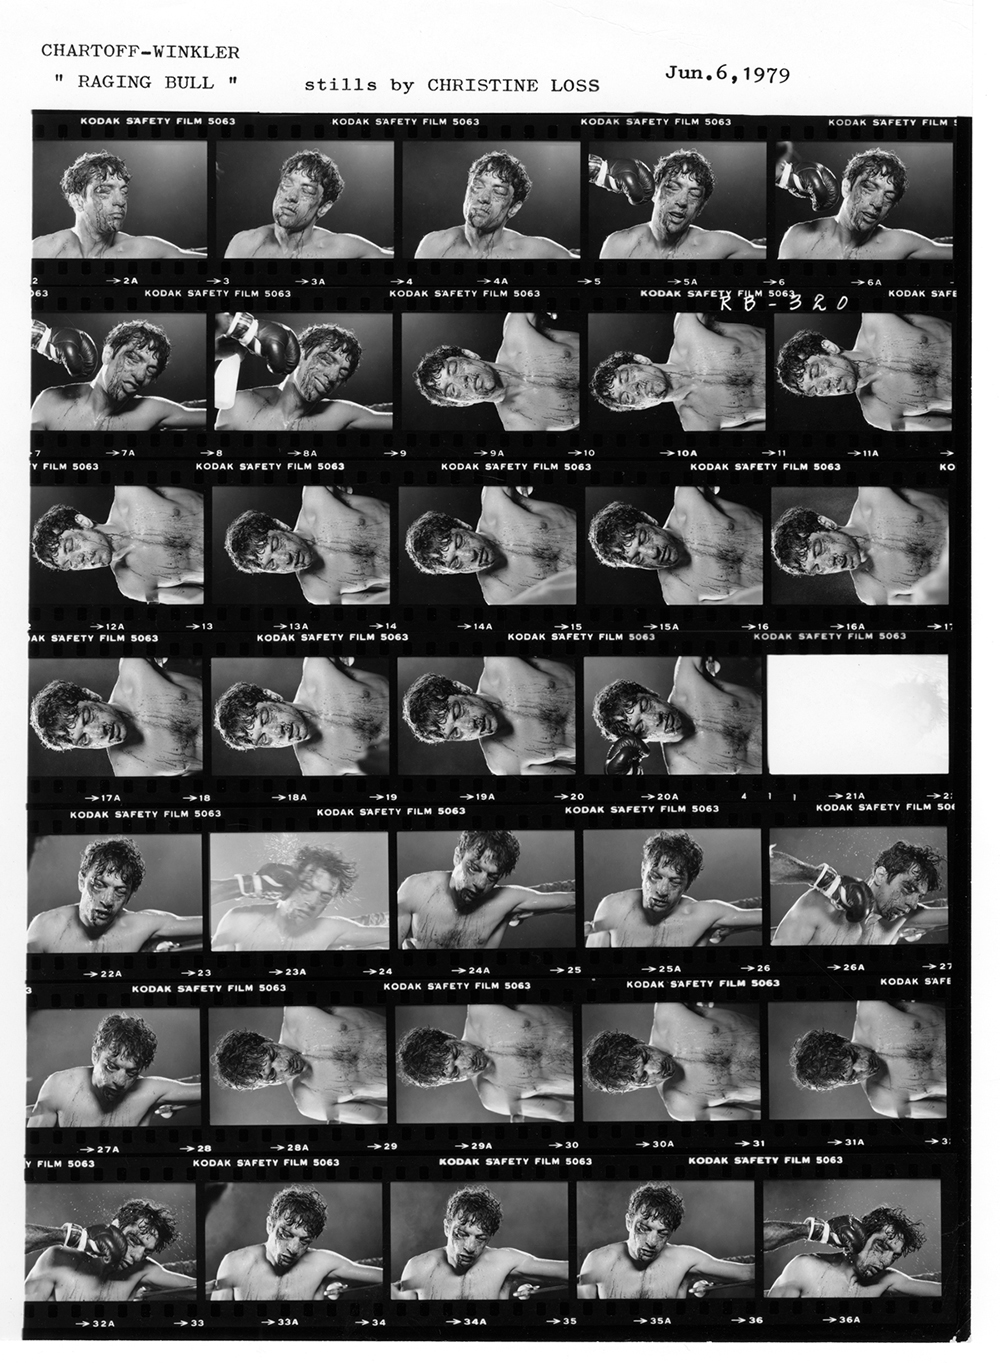 Contact Sheet Outtakes Show Hollywood’s Greatest Icons Caught Off Guard